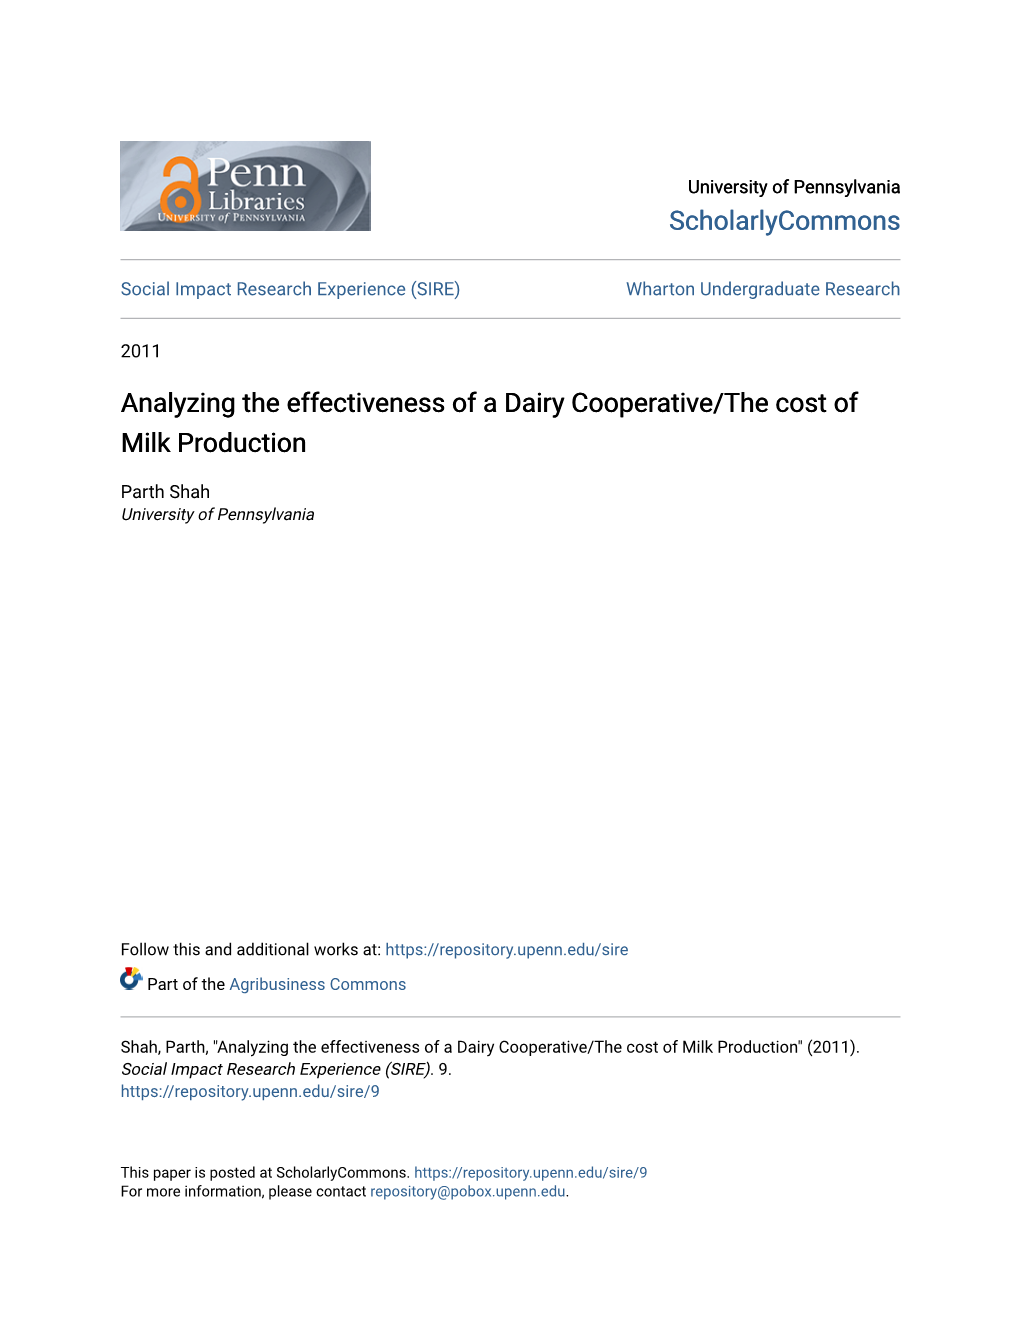 Analyzing the Effectiveness of a Dairy Cooperative/The Cost of Milk Production